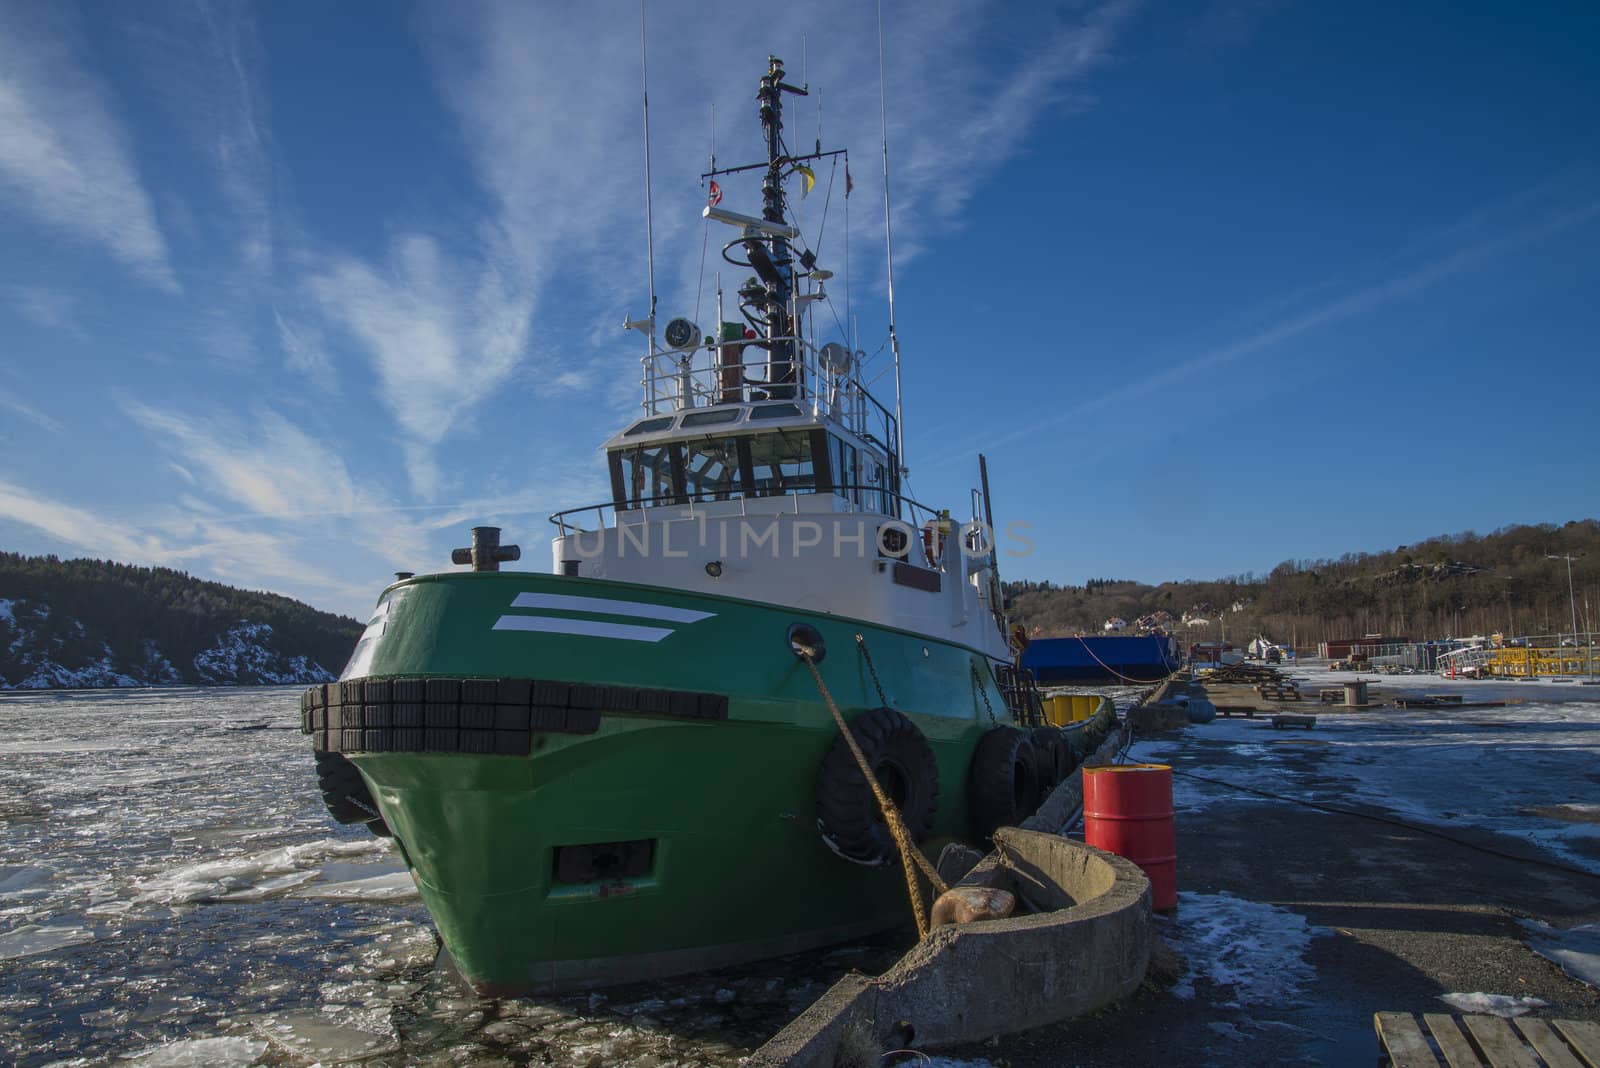 tug "boa sund" is currently moored to the quay at the port of halden, the image is shot in february 2013.